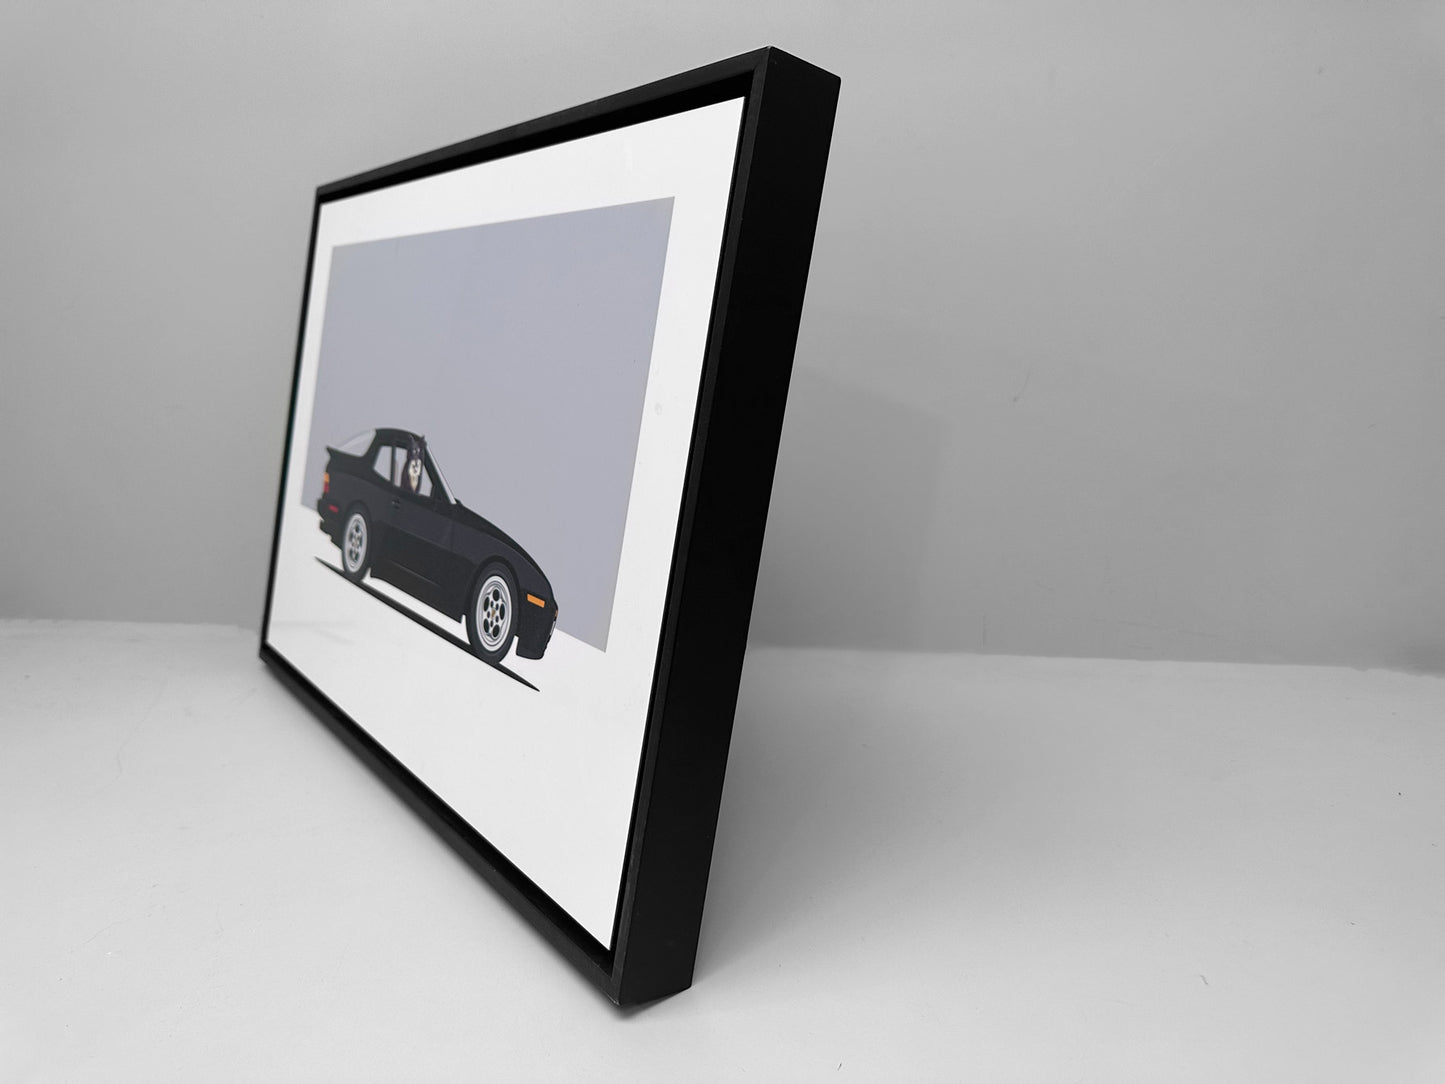 HD Metal Print in Black Wood Float Frame - 40x60 inches - 35% OFF!  - Only 3 Available.